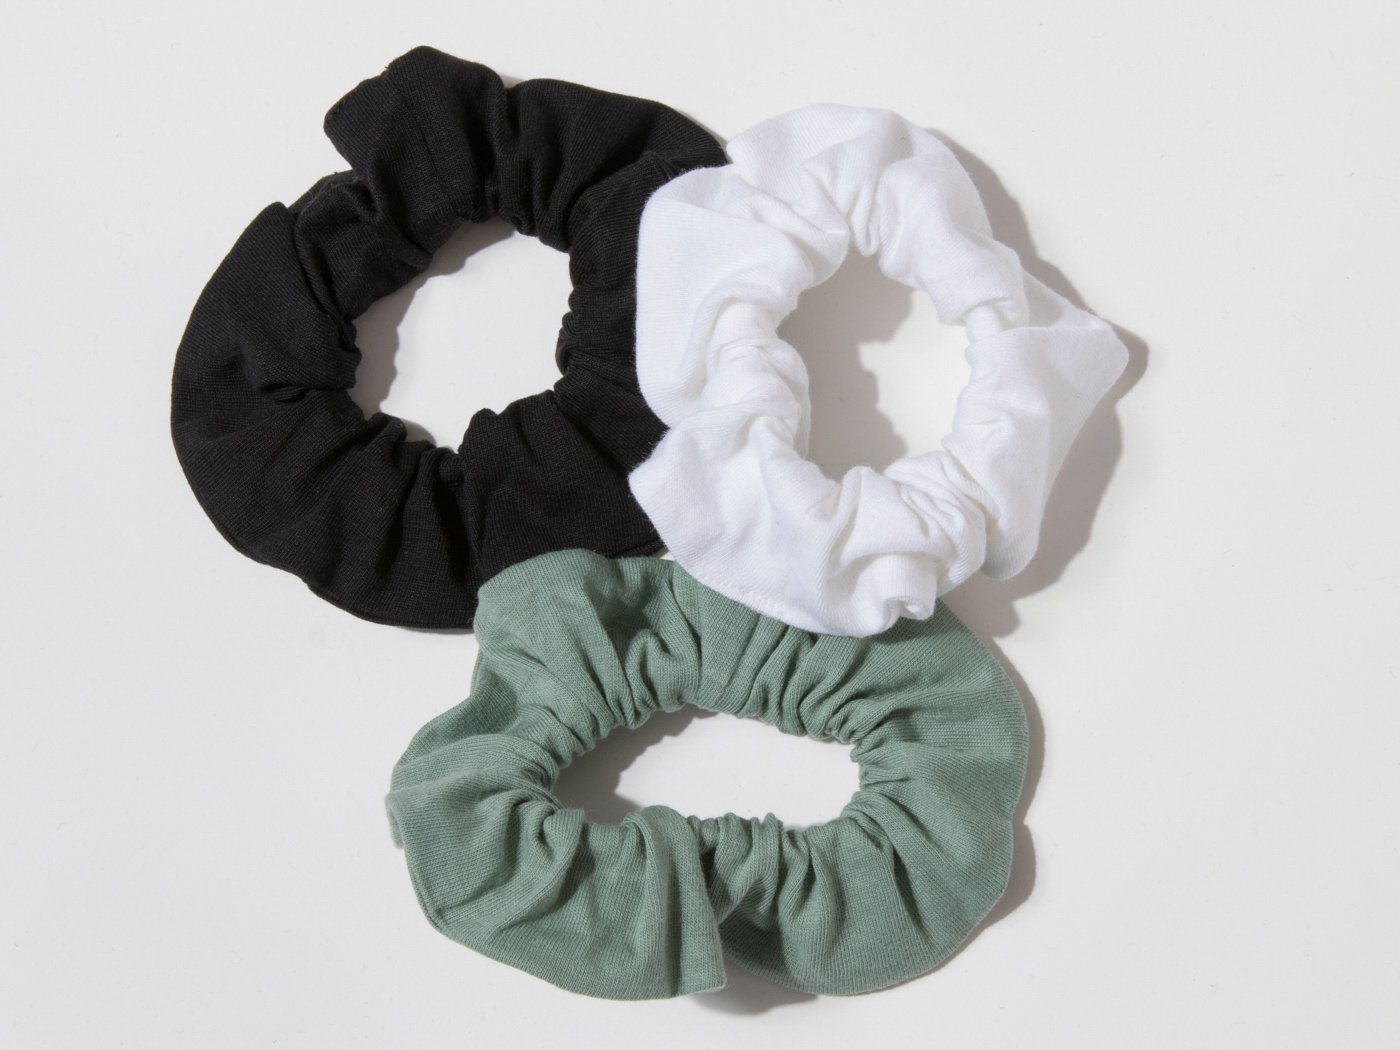 Invincible Scrunchie Set Of 3 - Black, White, Black Accessories Scrunchie Threads 4 Thought 